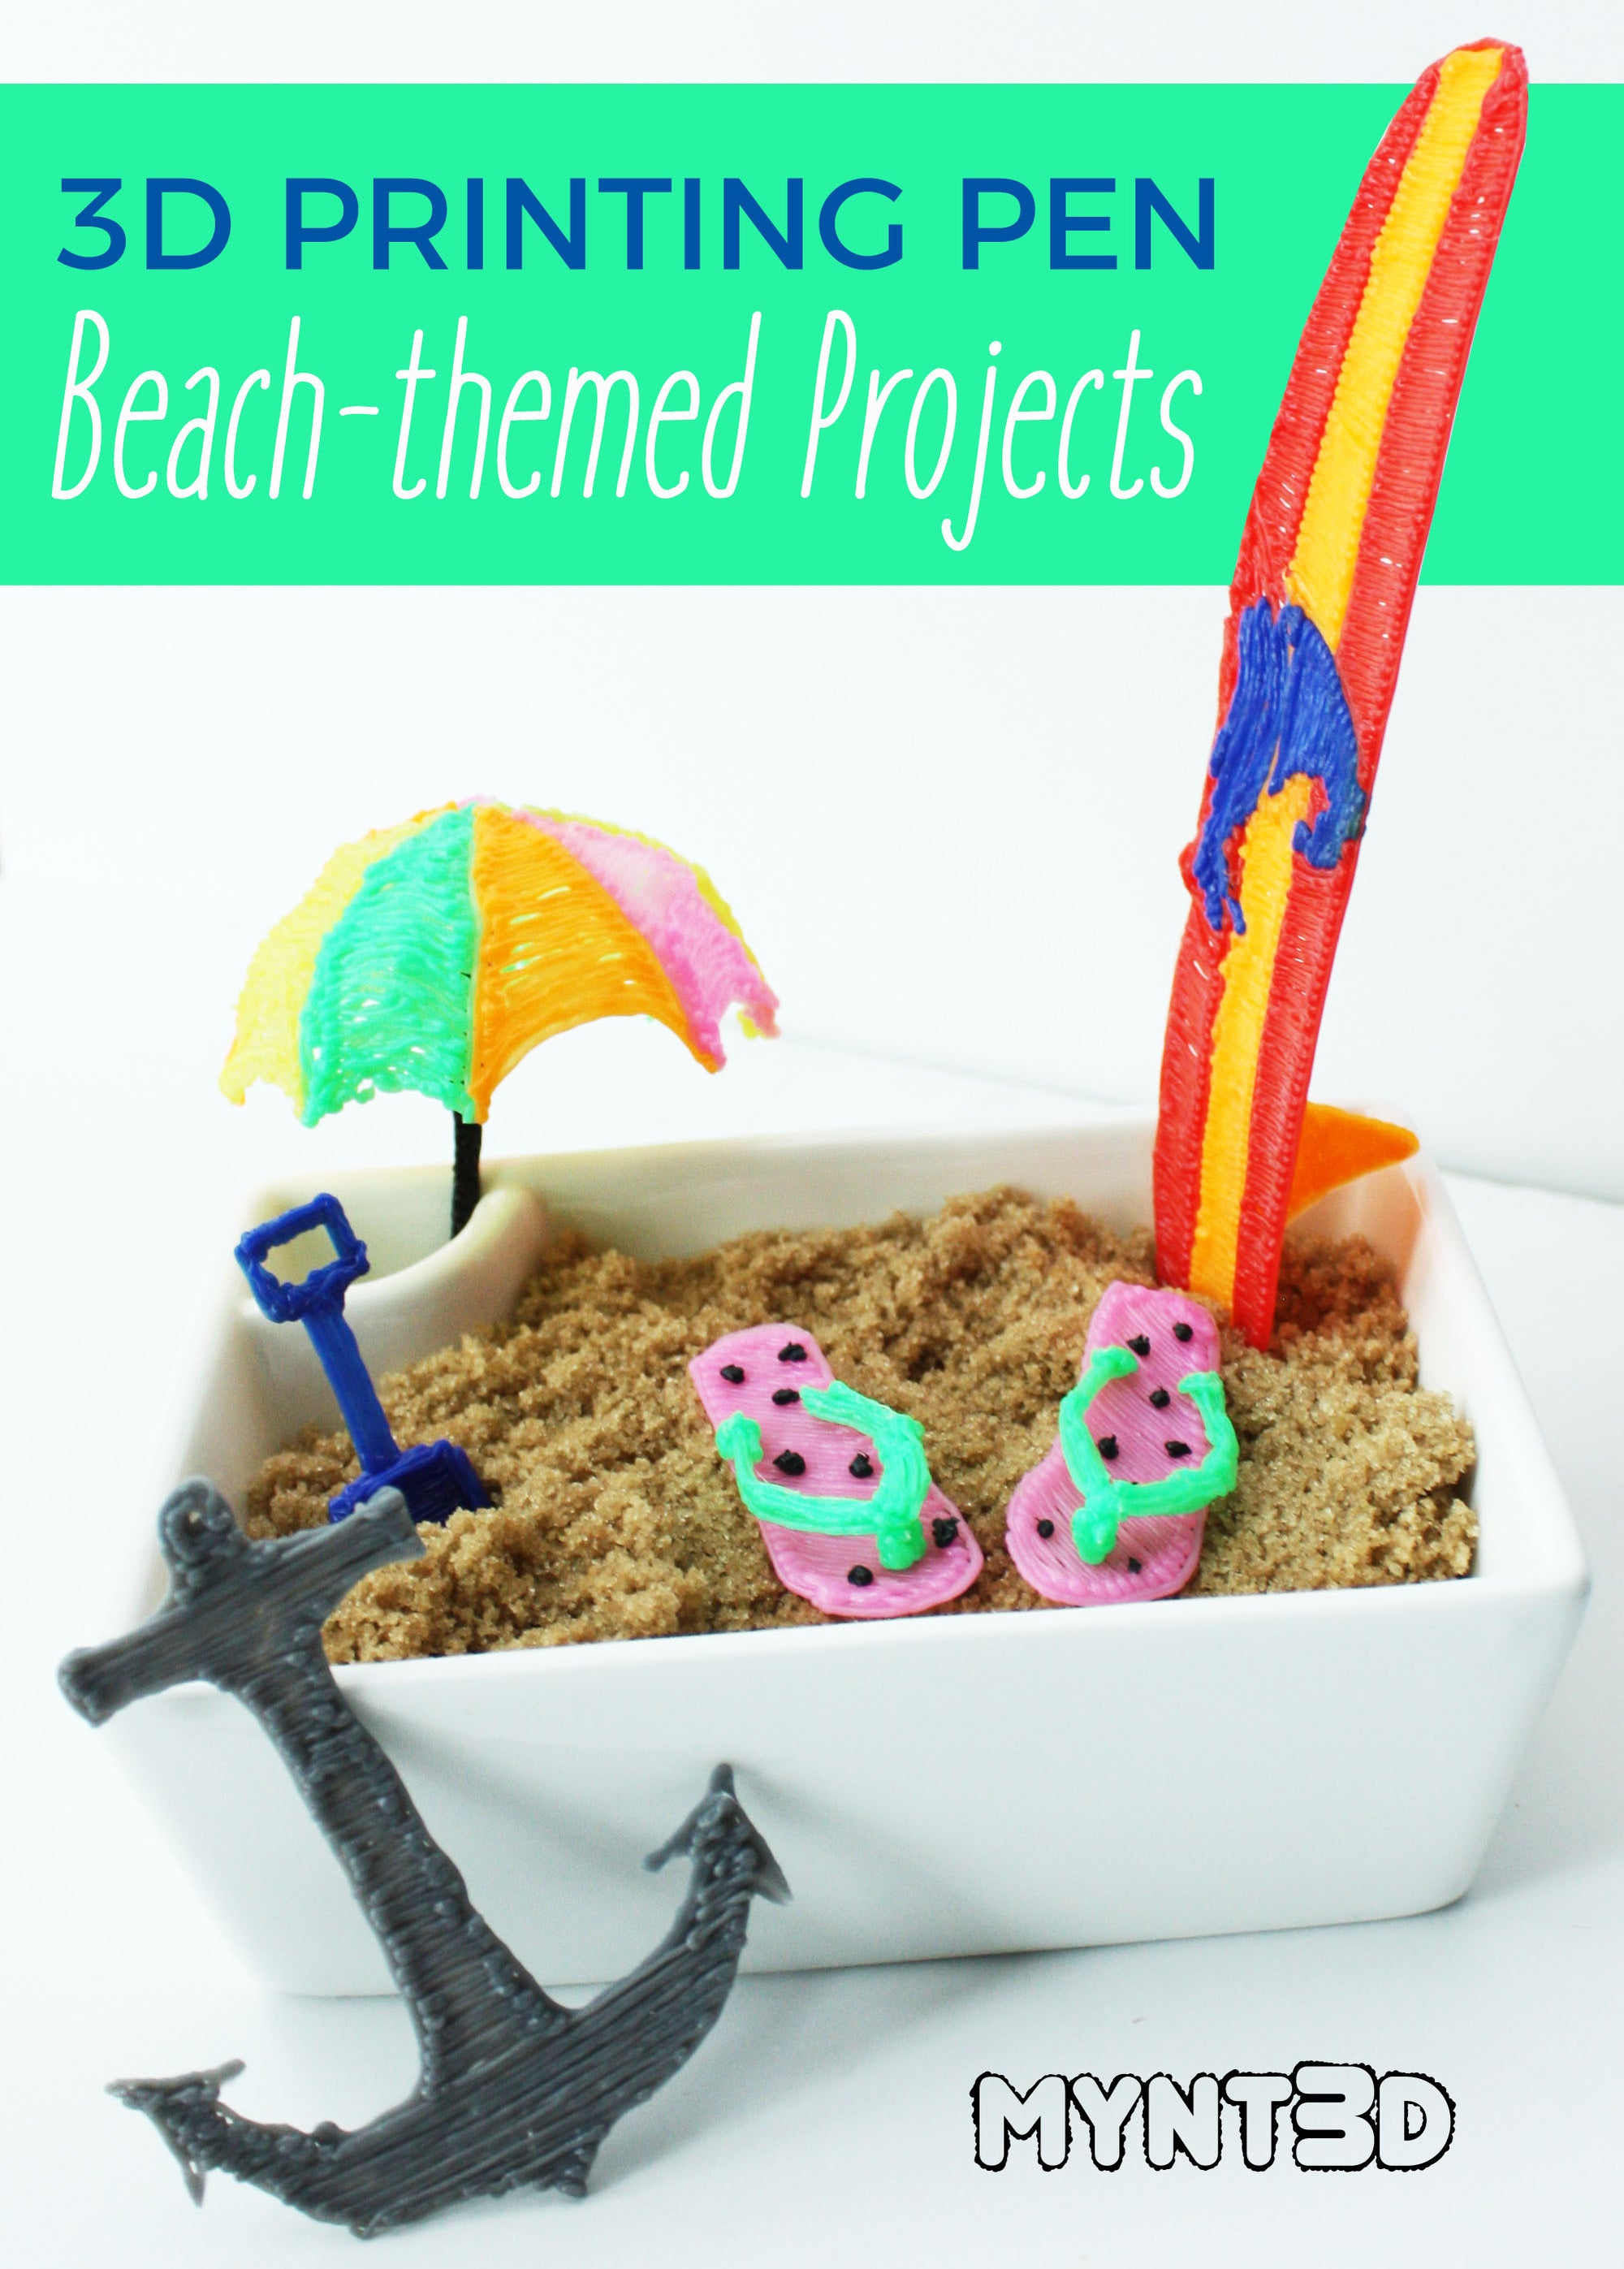 Beach-themed Projects Made with a 3D Printing Pen